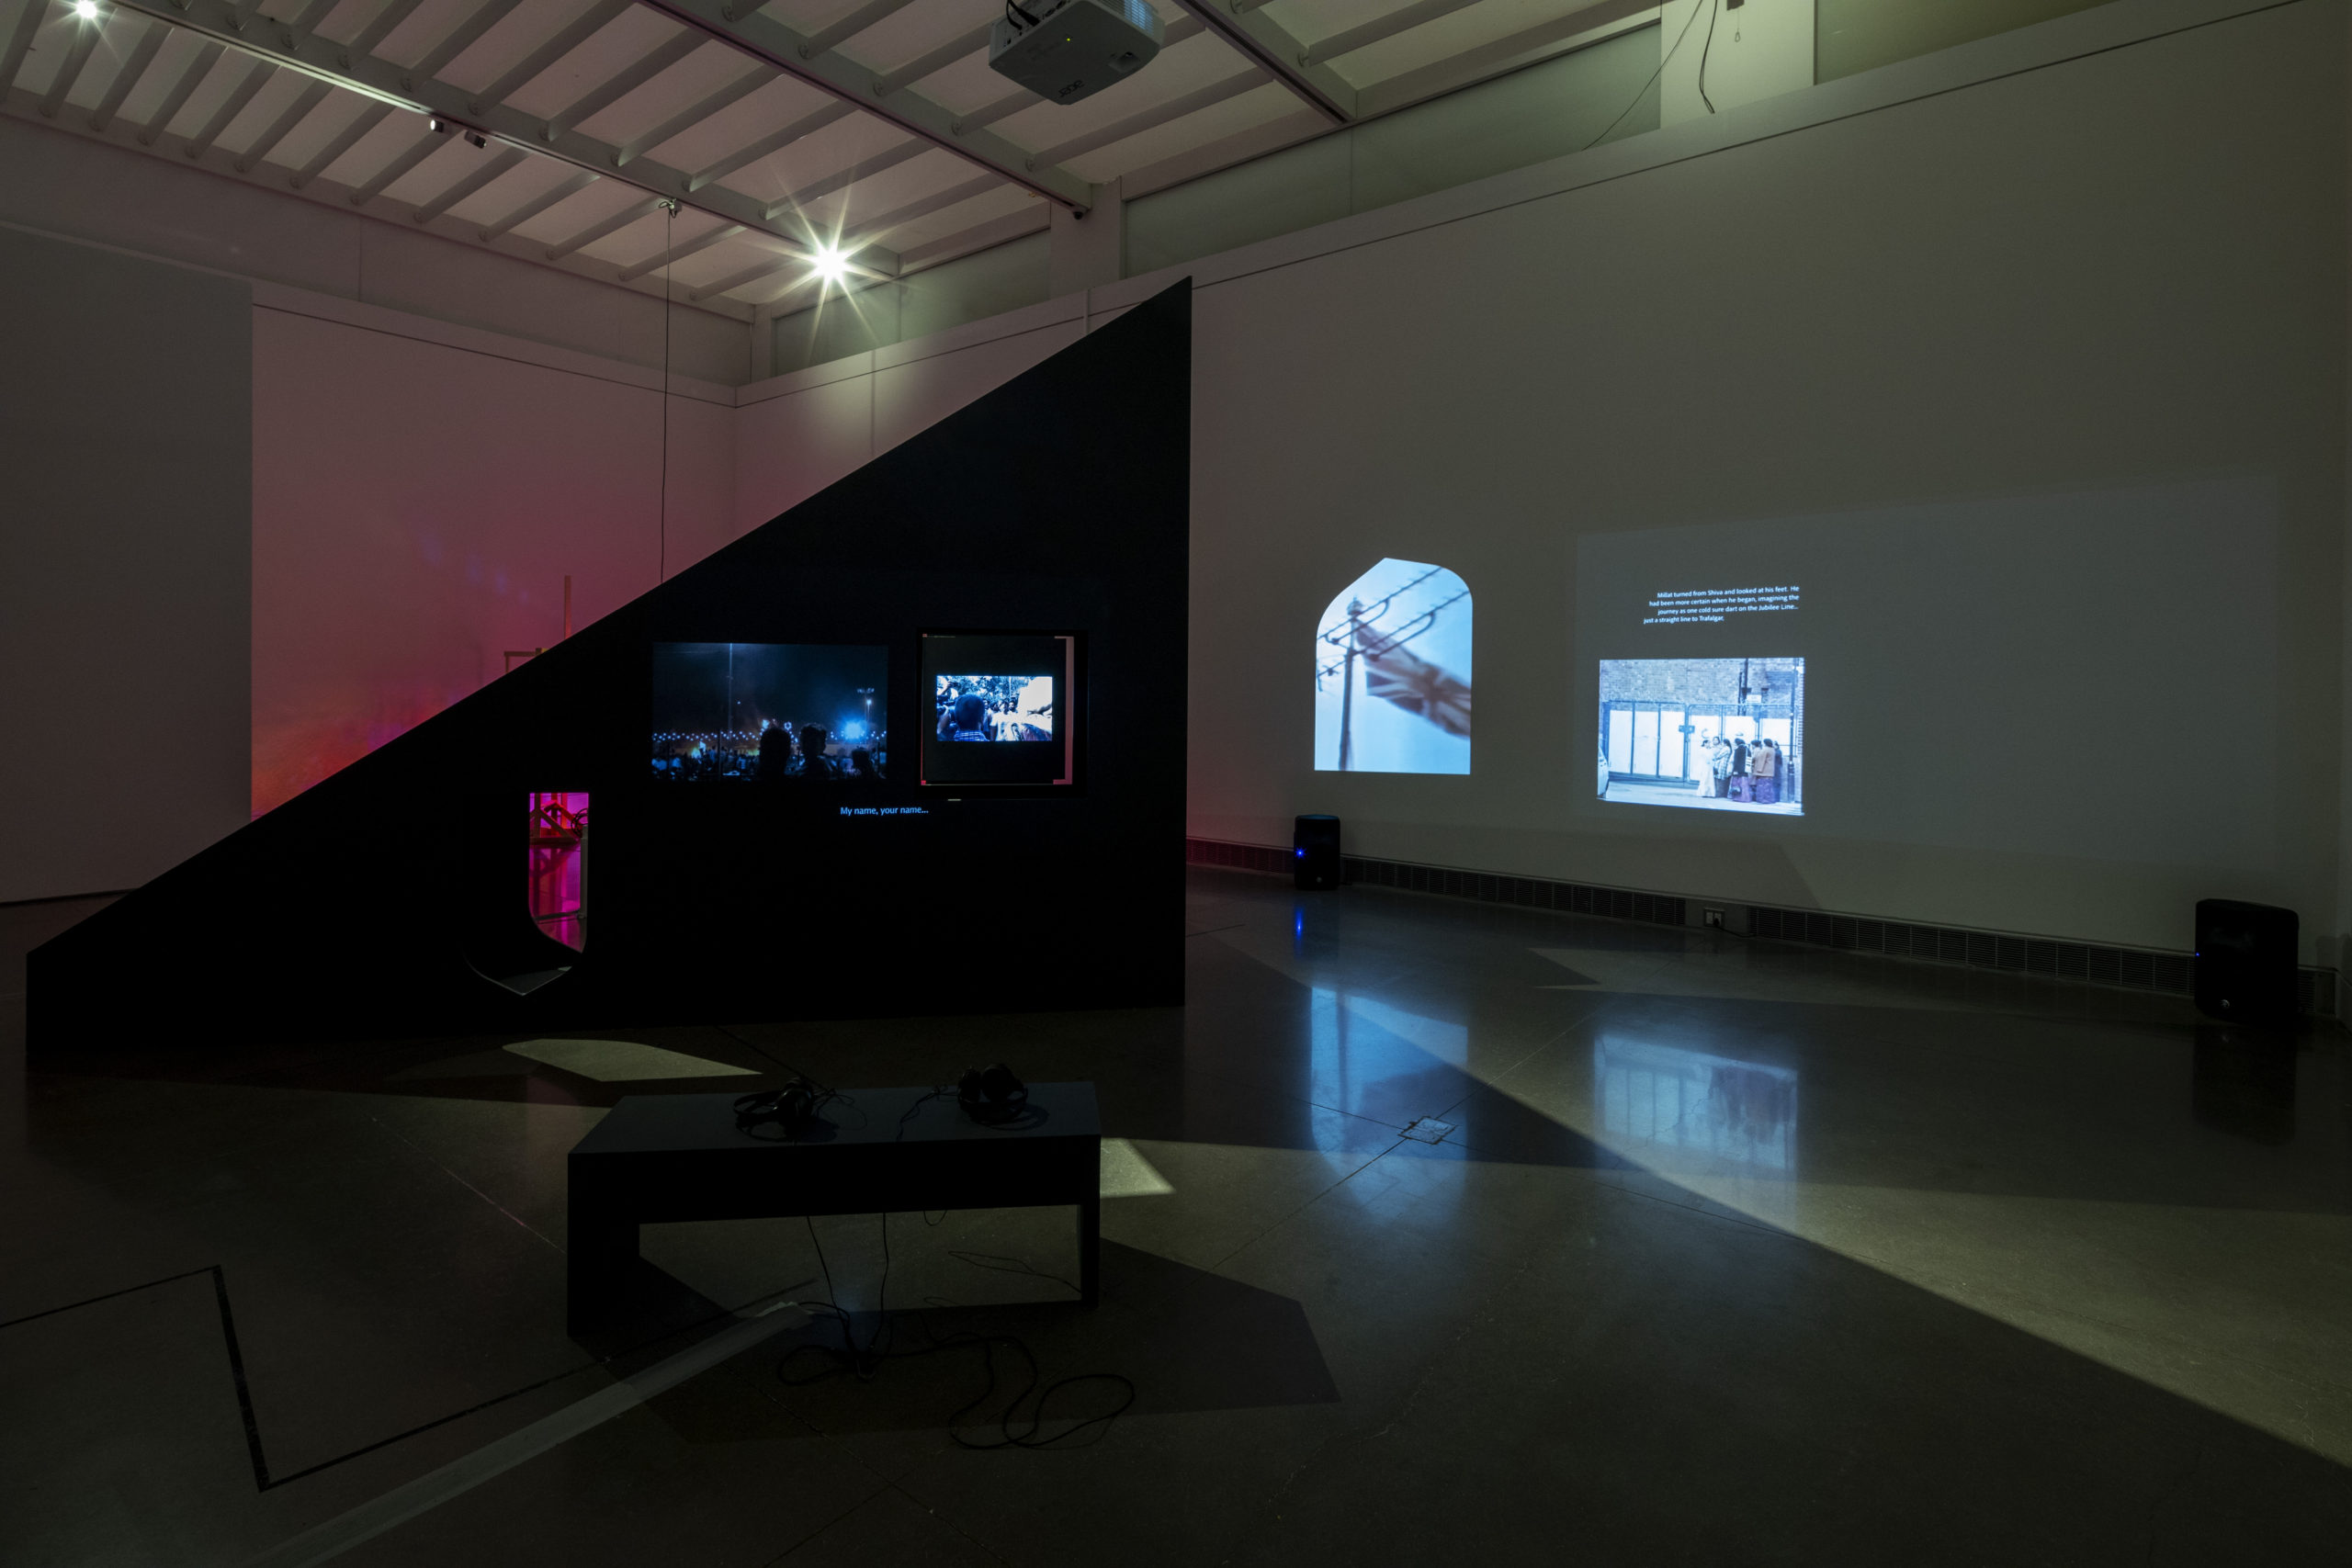 Behind a black bench with headphones is a huge triangular sundial structure containing two square cutouts through which protest video stills are projected. On the white wall to the right are two more projections: an archival Union Jack flag, and small white text above a still of a group of South Asian women on a labor strike.